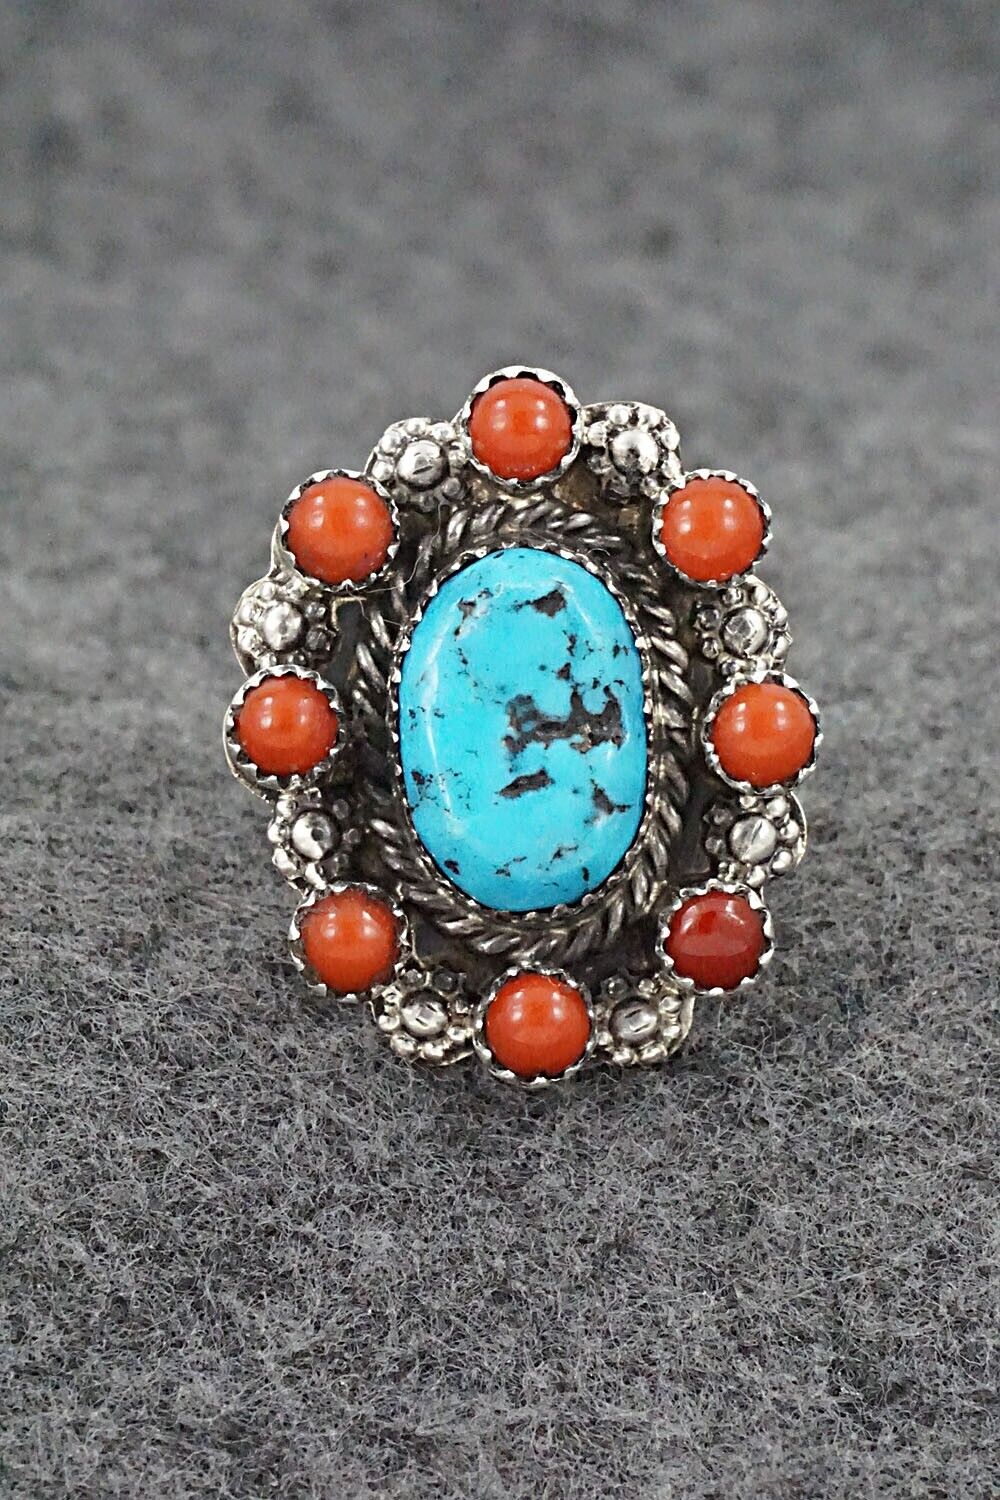 Turquoise, Coral & Sterling Silver Ring - Rene Yazzie - Size 7.5